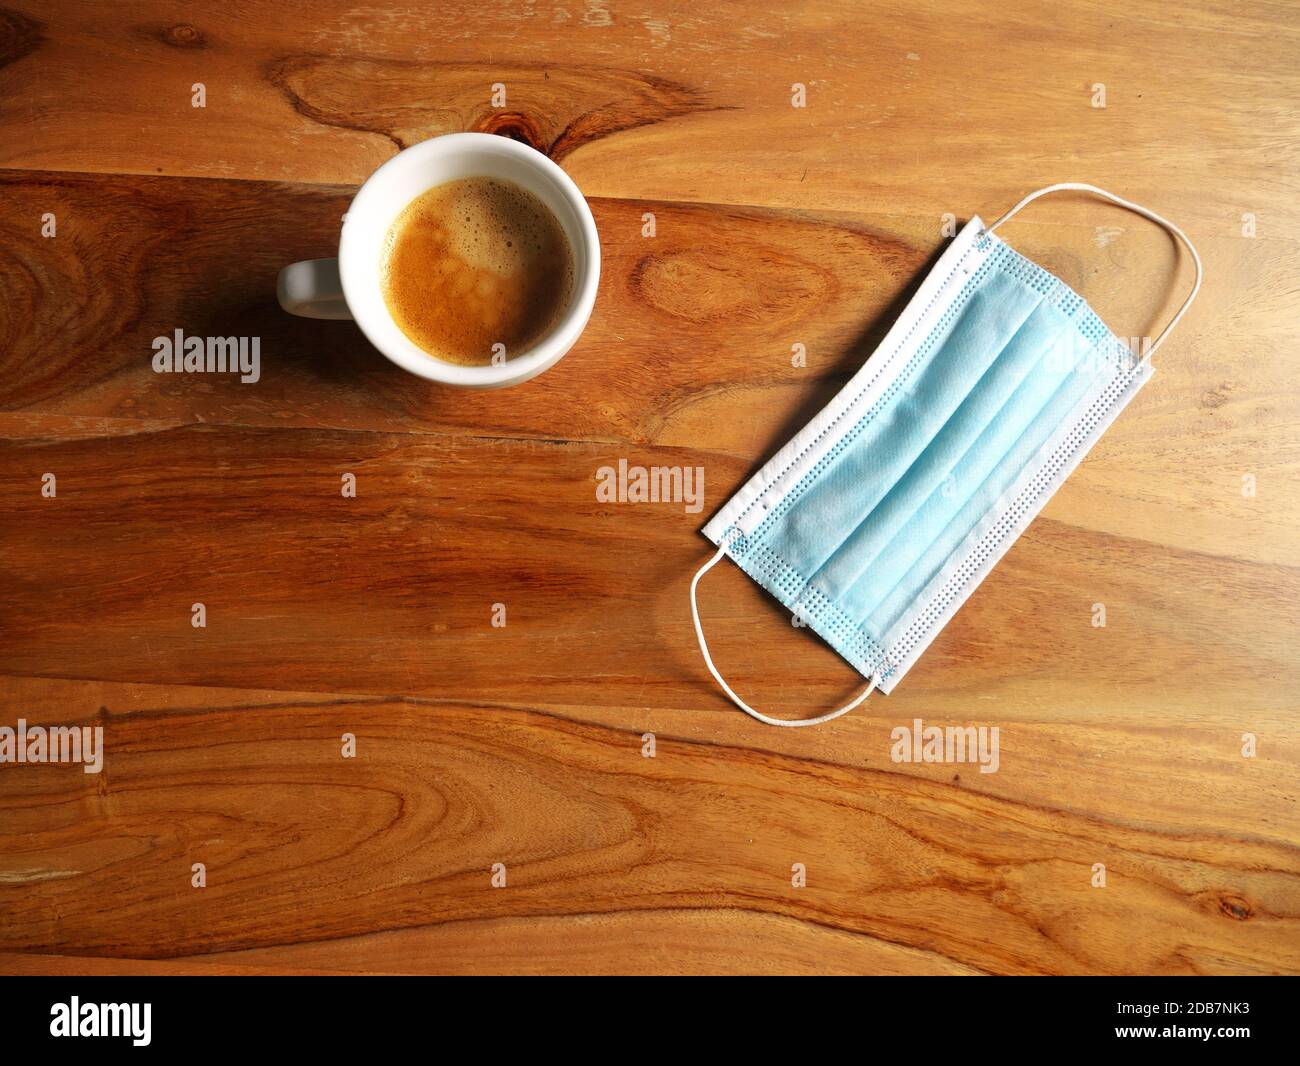 Coffee cup placed on a wooden table next to a mask. Top view Stock Photo